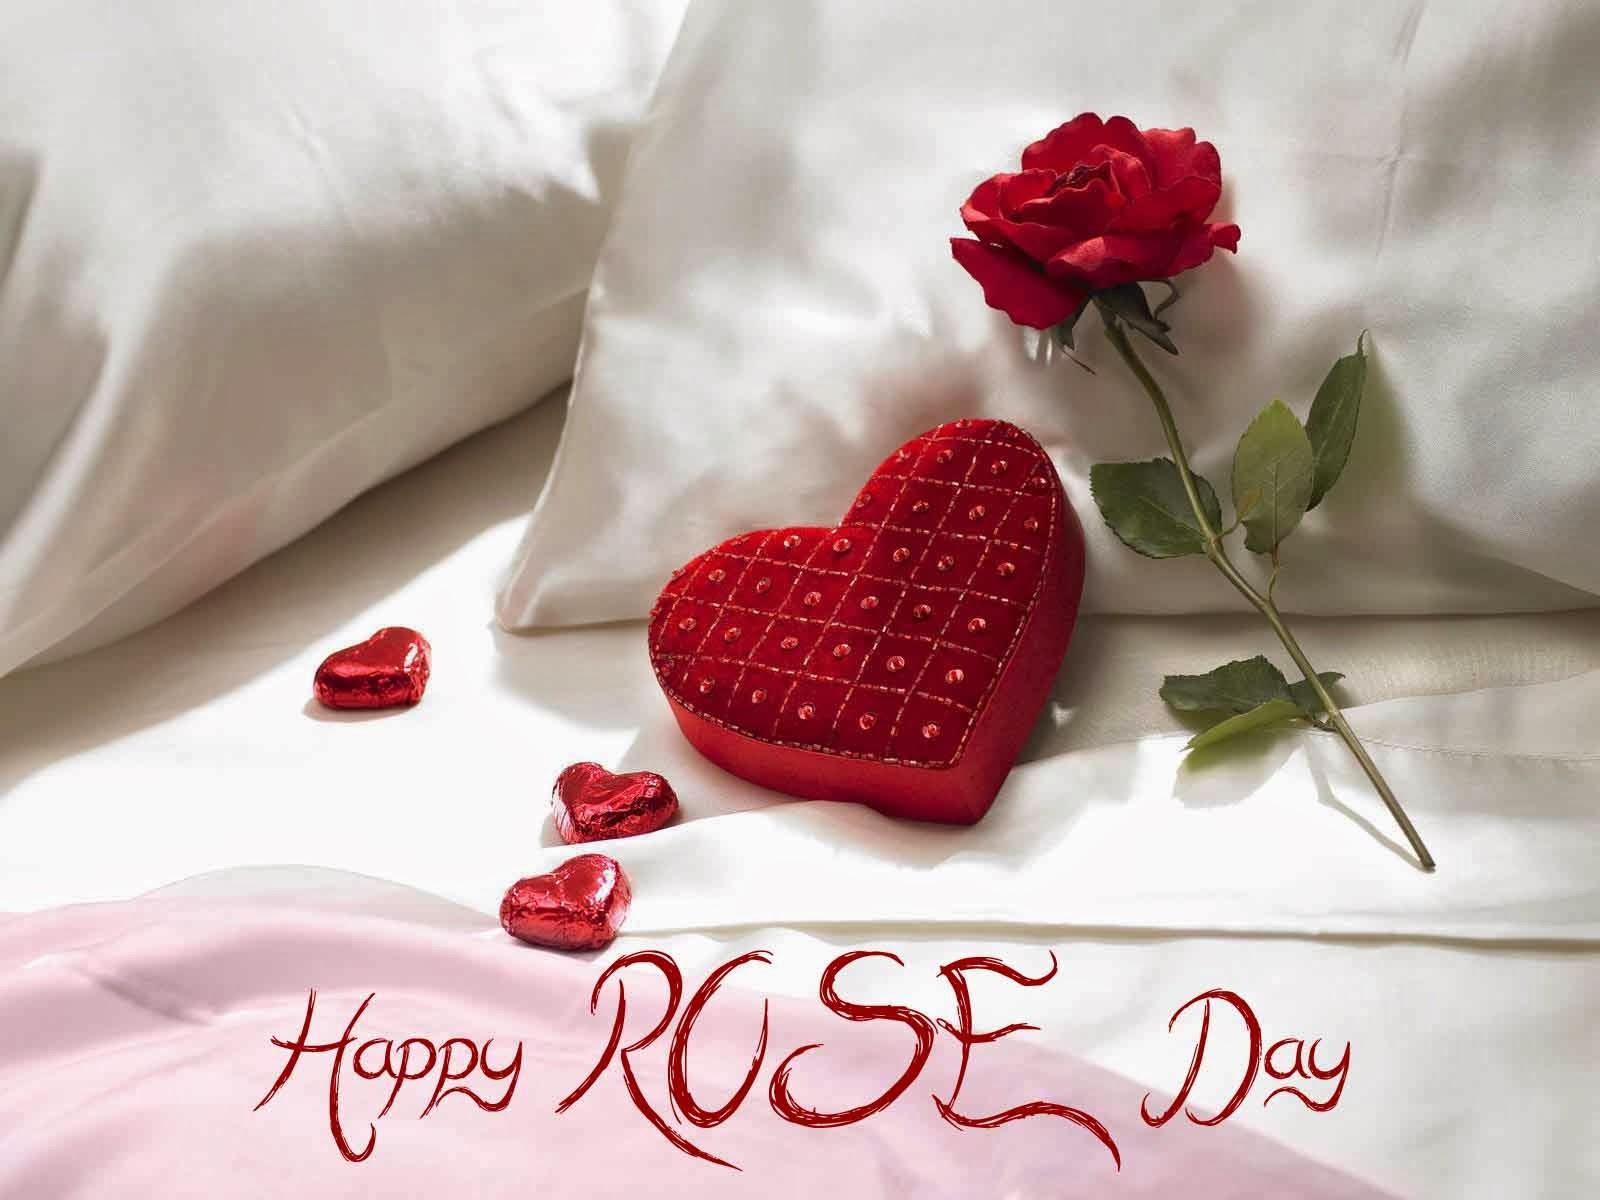 Happy Rose Day 2014 English SMS, Quotes, Wishes, Picture, Image